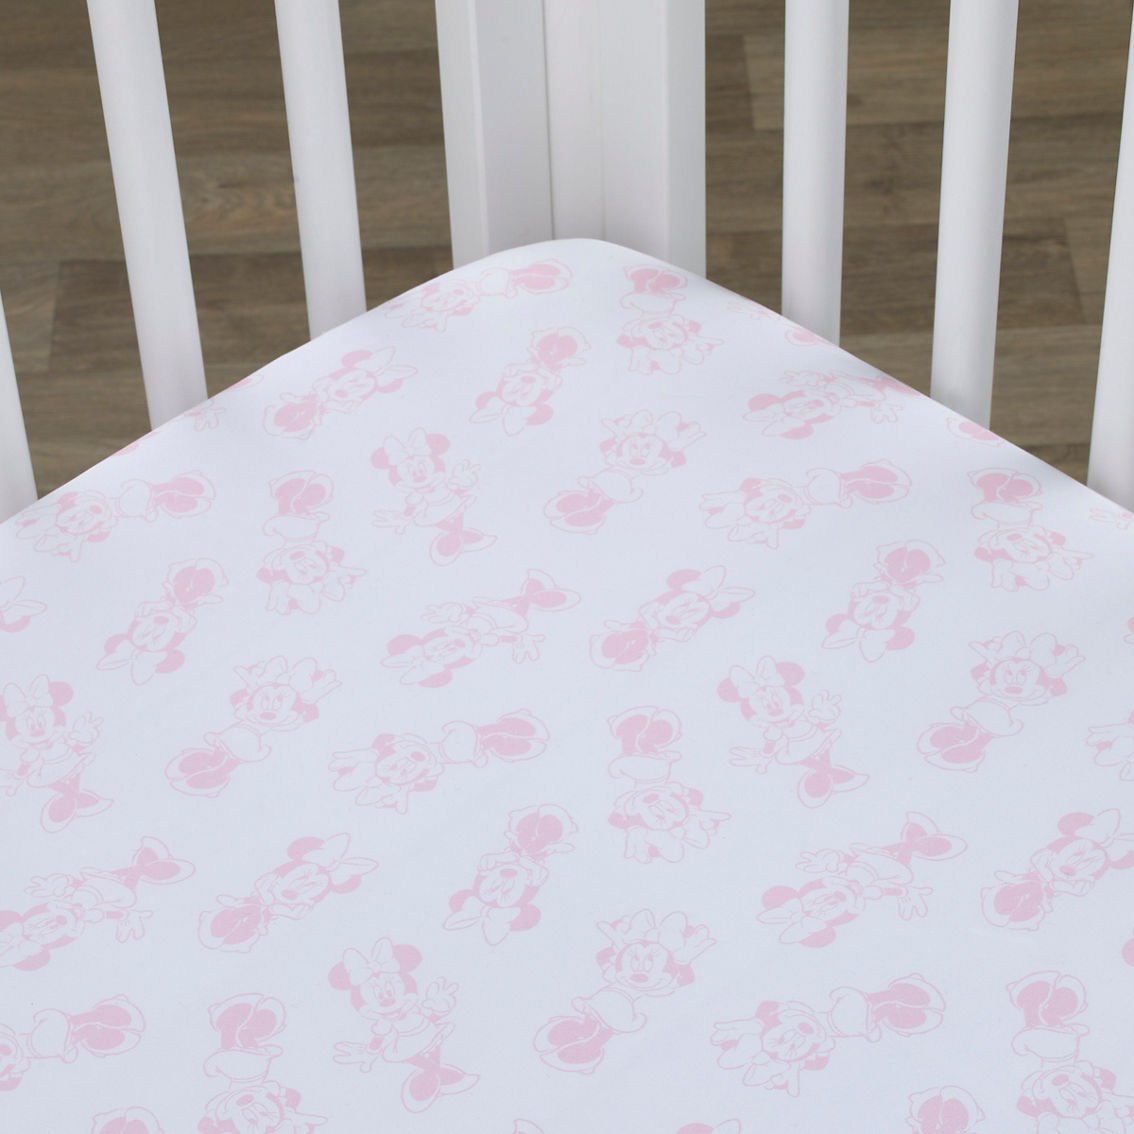 Disney Minnie Mouse Be Happy Pink and White Super Soft Fitted Crib Sheet - Image 4 of 5